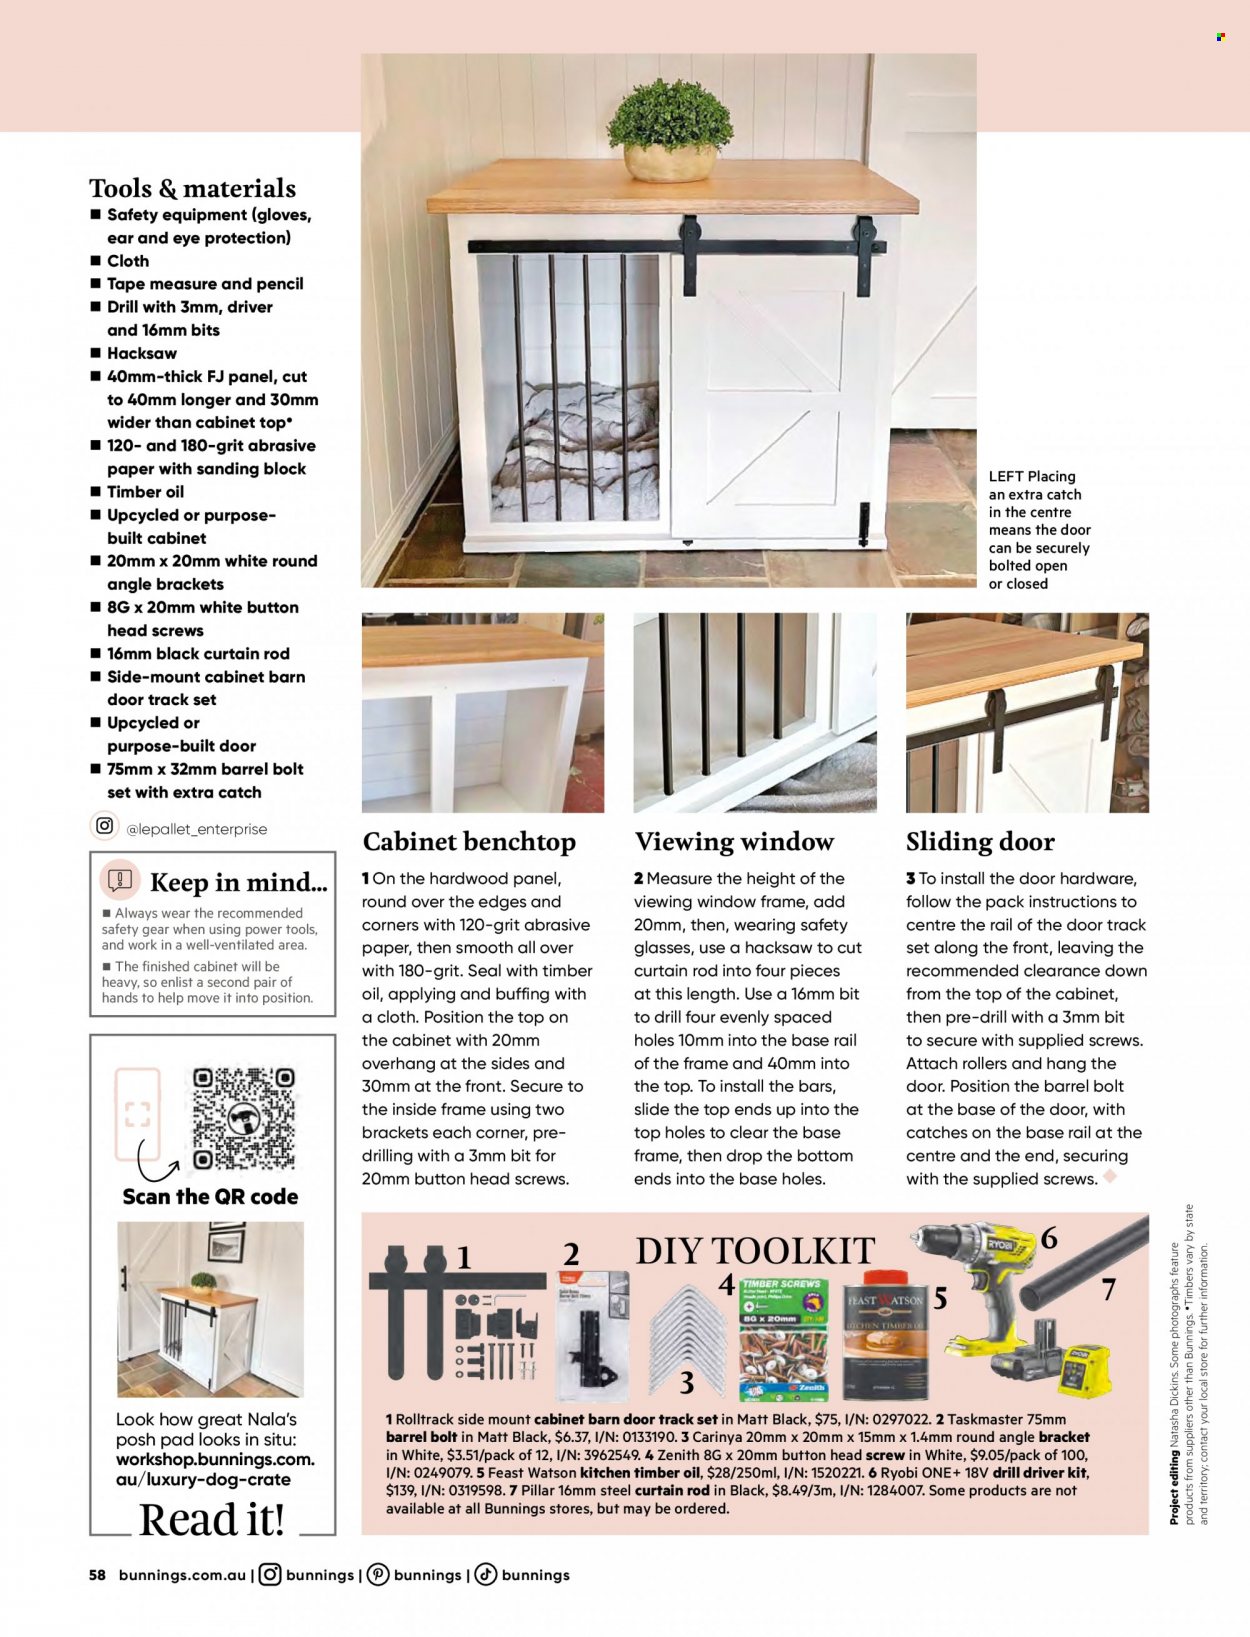 thumbnail - Bunnings Warehouse mailer - 01.05.2023 - 30.06.2023 - Sales products - cabinet, gloves, curtain, power tools, drill driver kit, Ryobi, hacksaw, measuring tape, safety glasses, crate, curtain rod. Page 58.